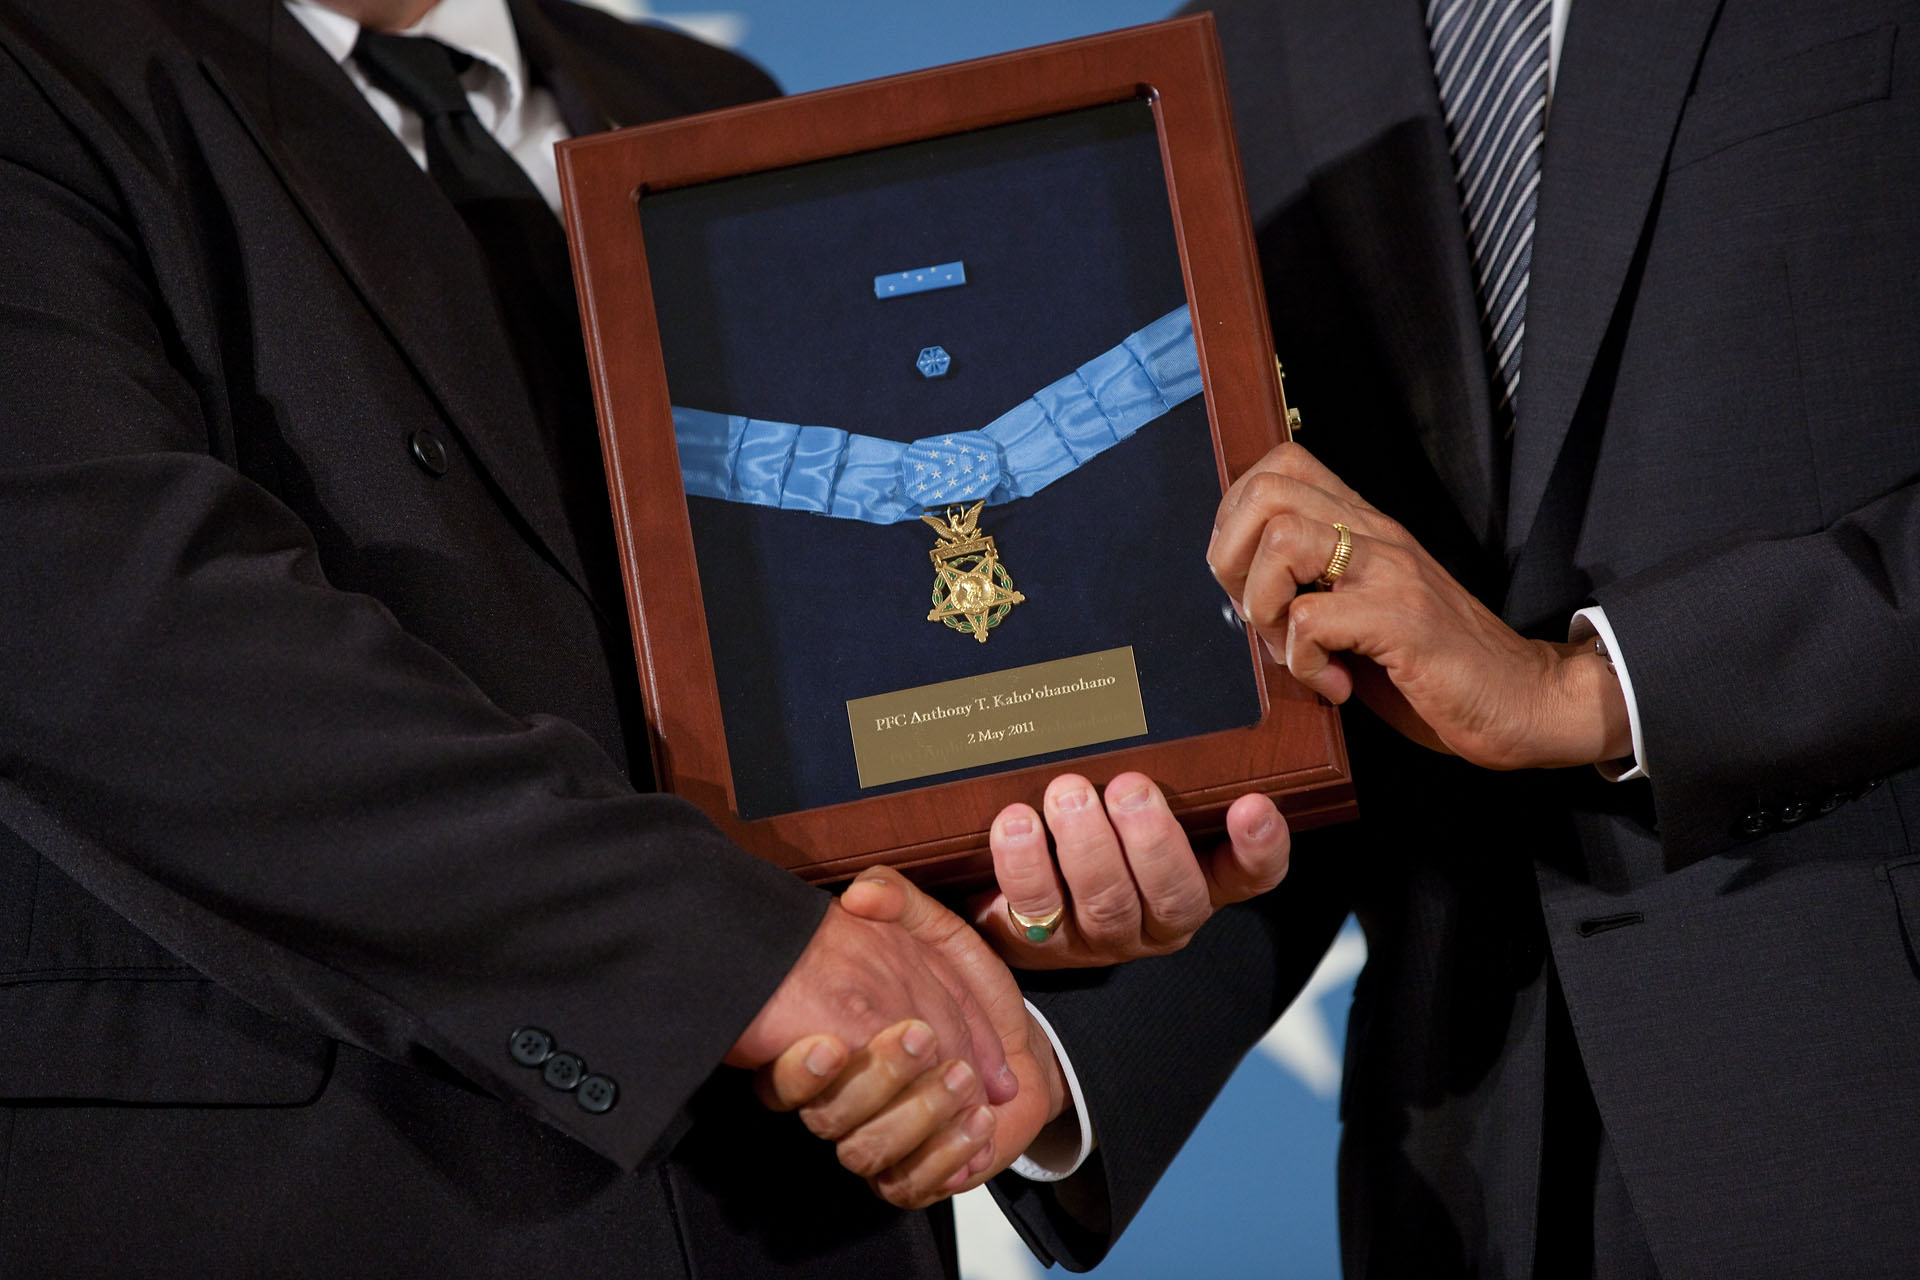 President Barack Obama Awards the Medal of Honor Posthumously to Private First Class Anthony T. Kaho'ohanohano, U.S. Army